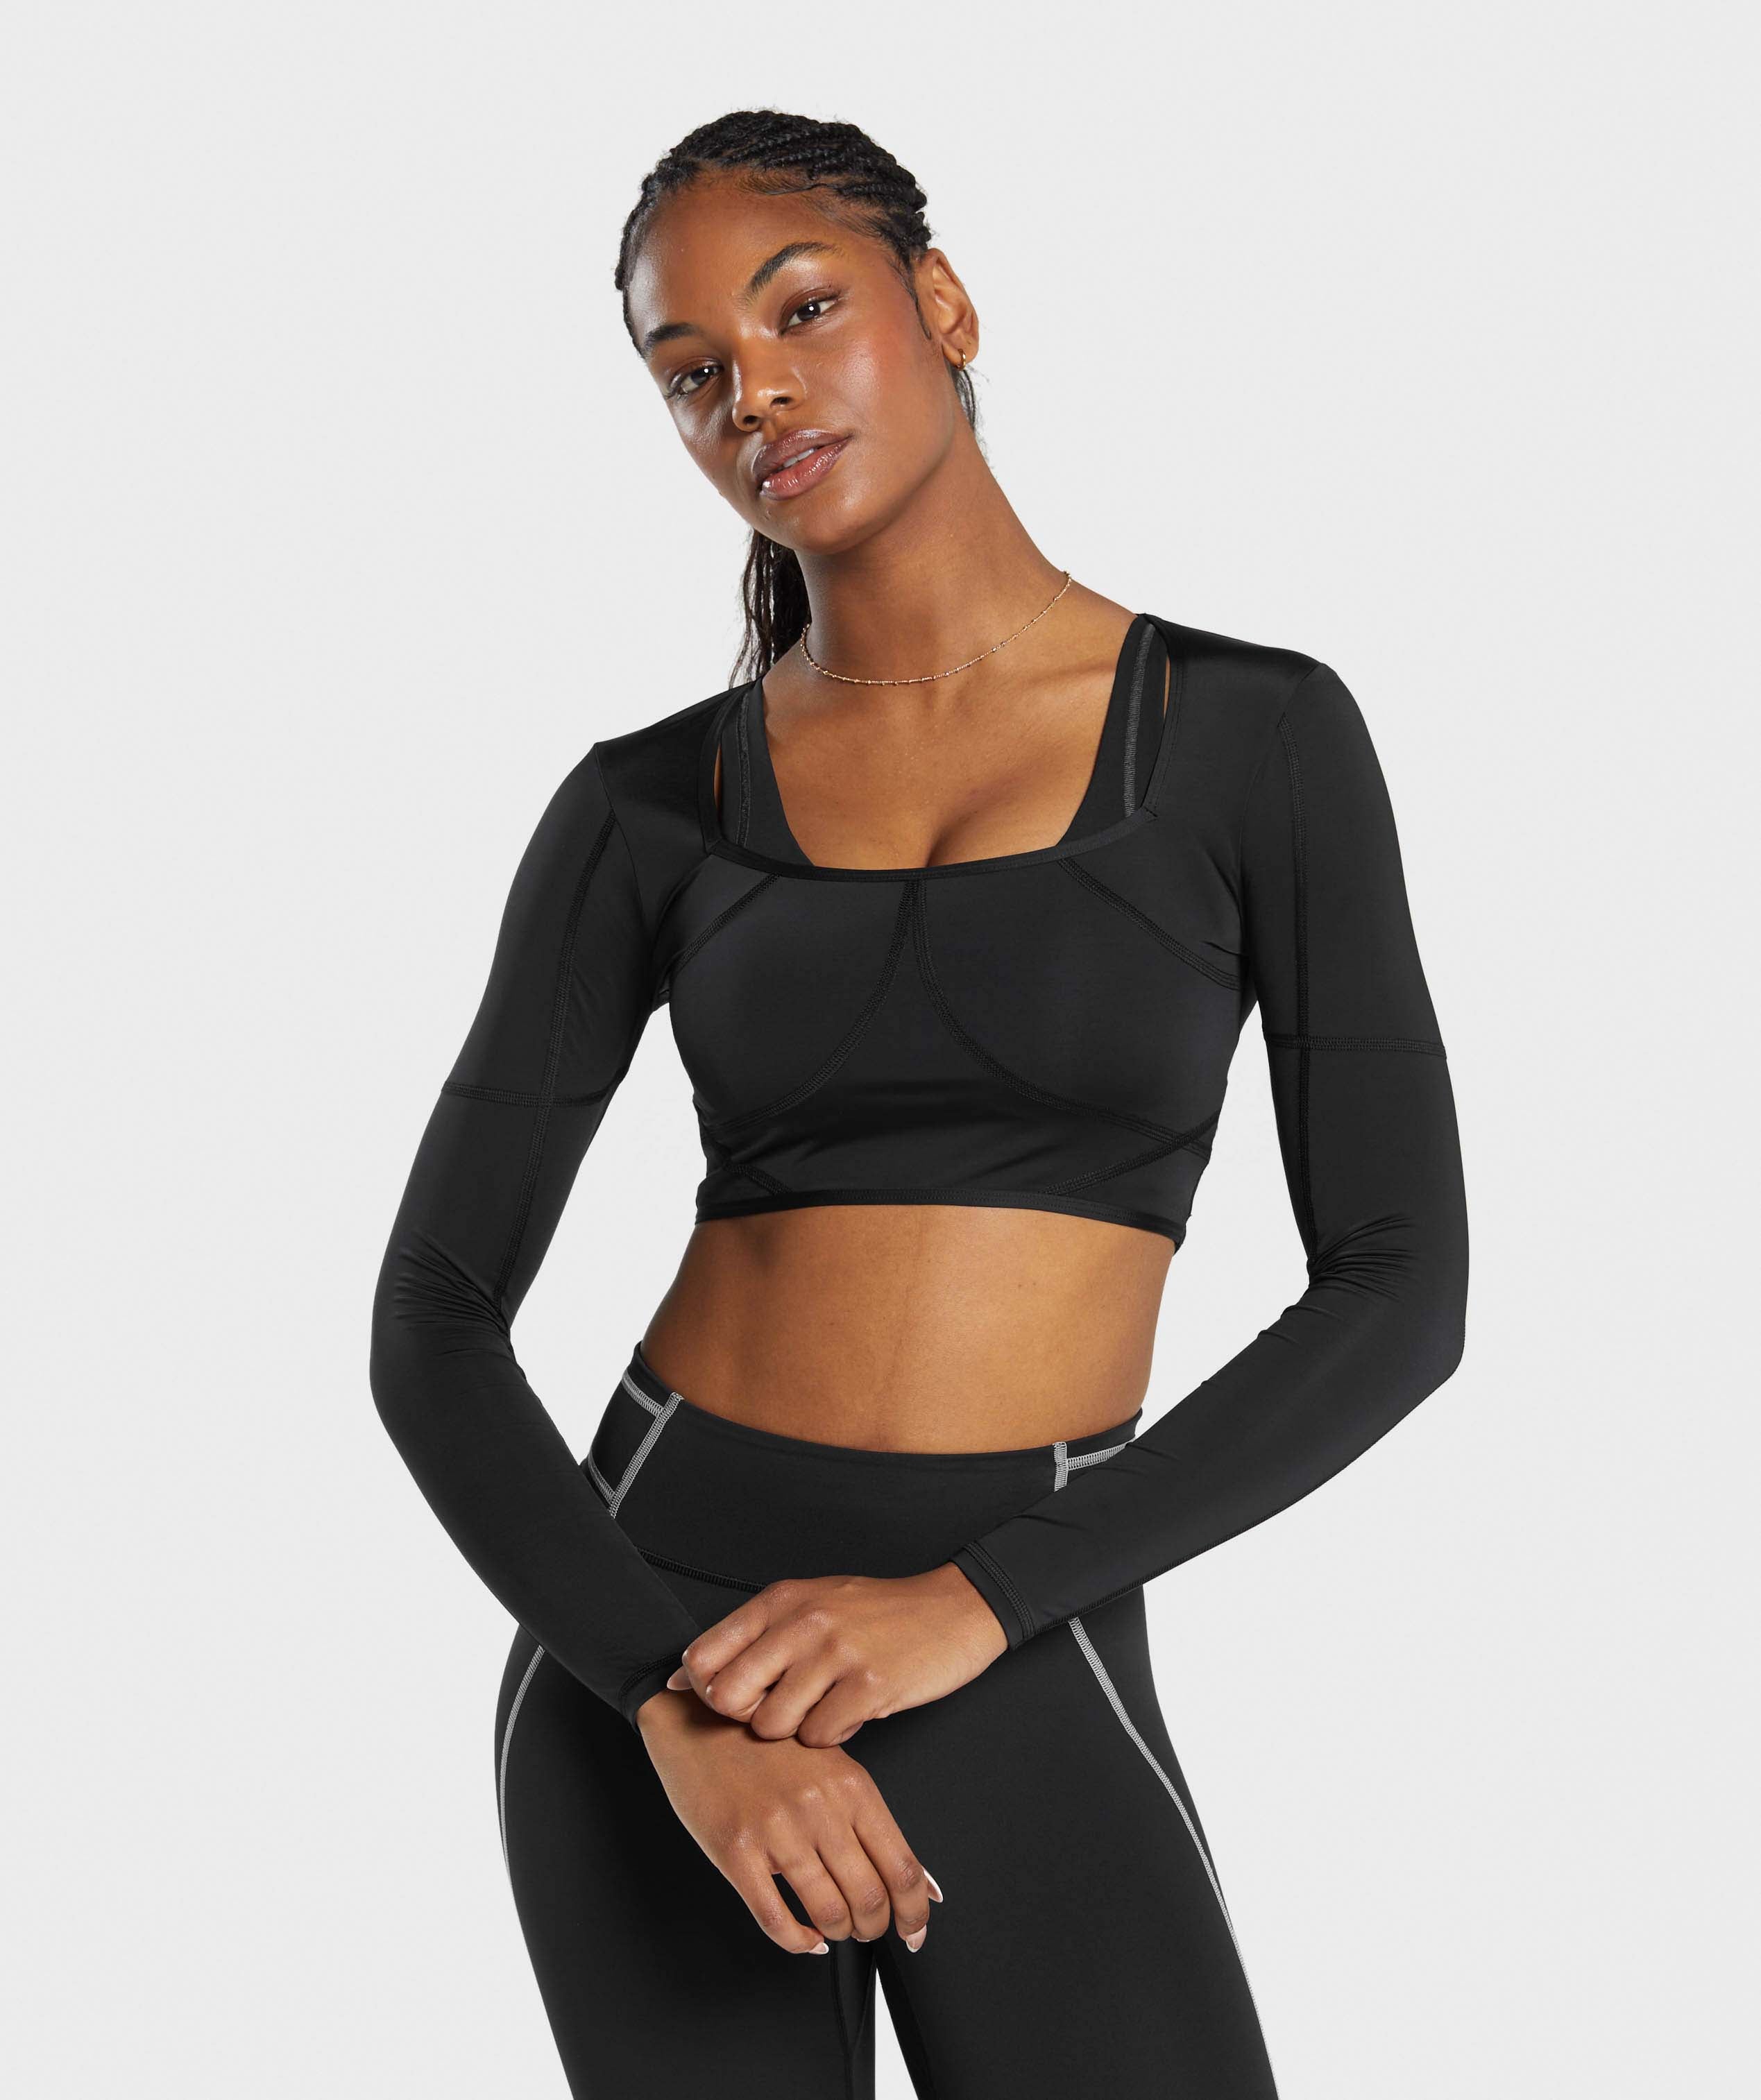 Stitch Feature Long Sleeve Crop Top in Black/Stock Black Marl